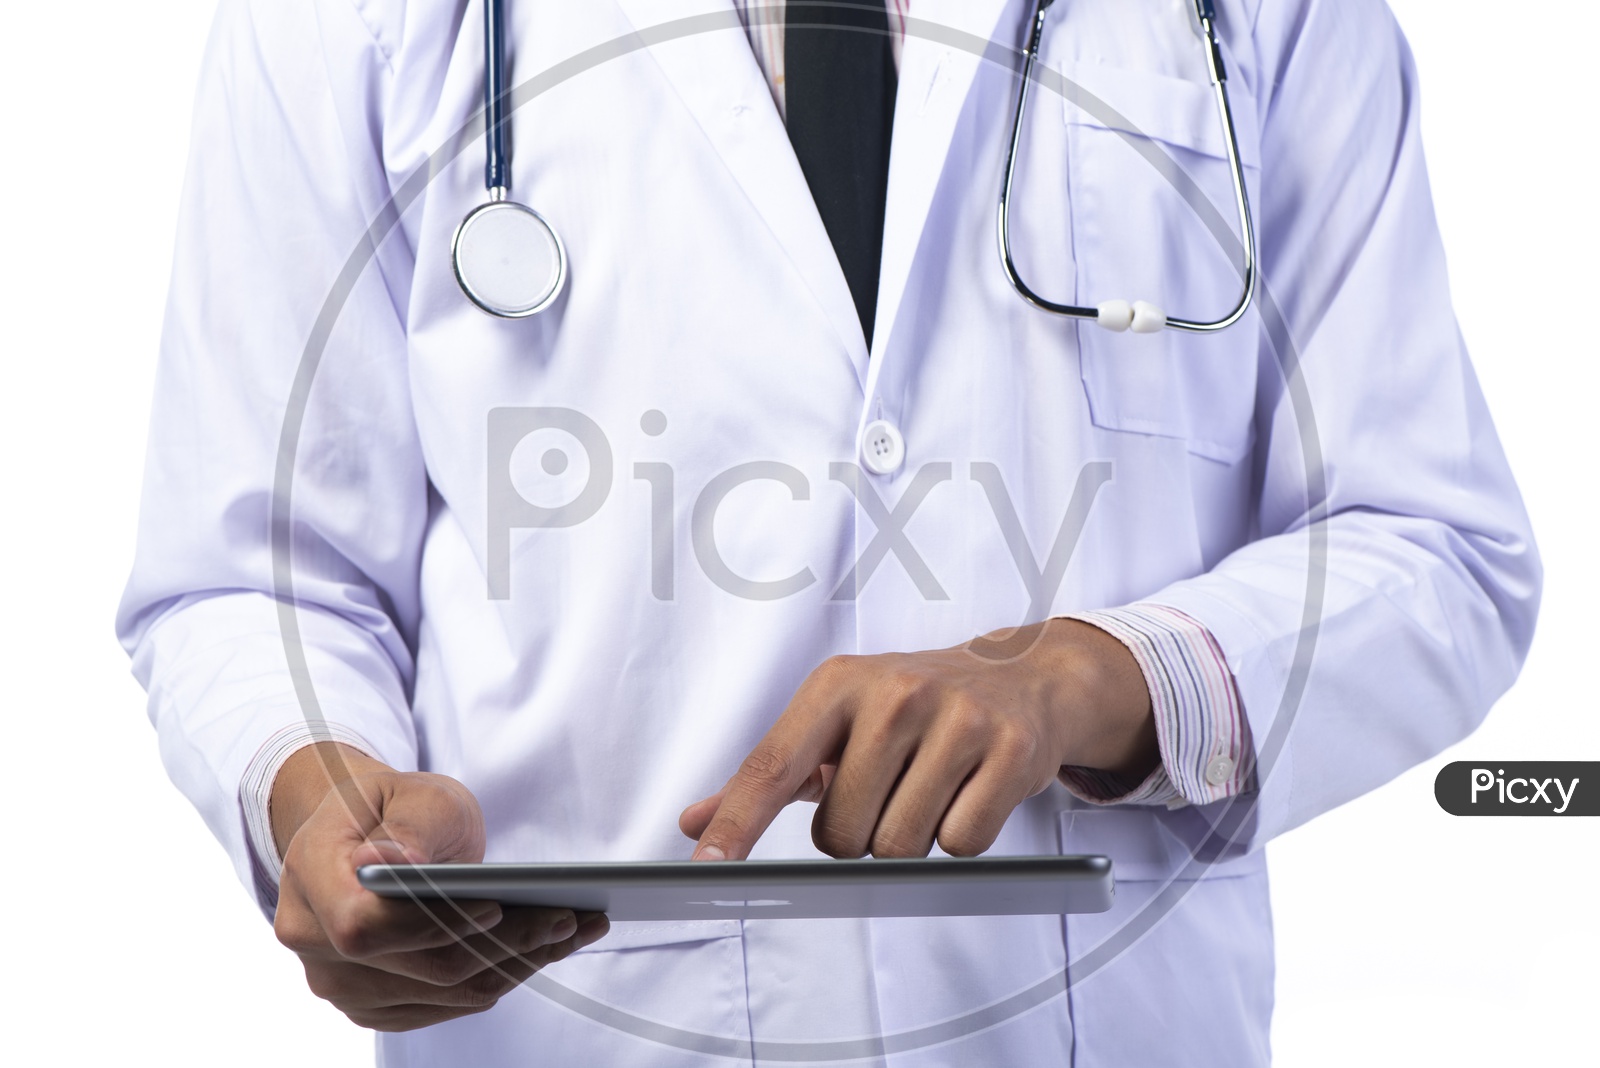 Asian Doctor with Stethoscope using Tablet or iPad isolated on white background